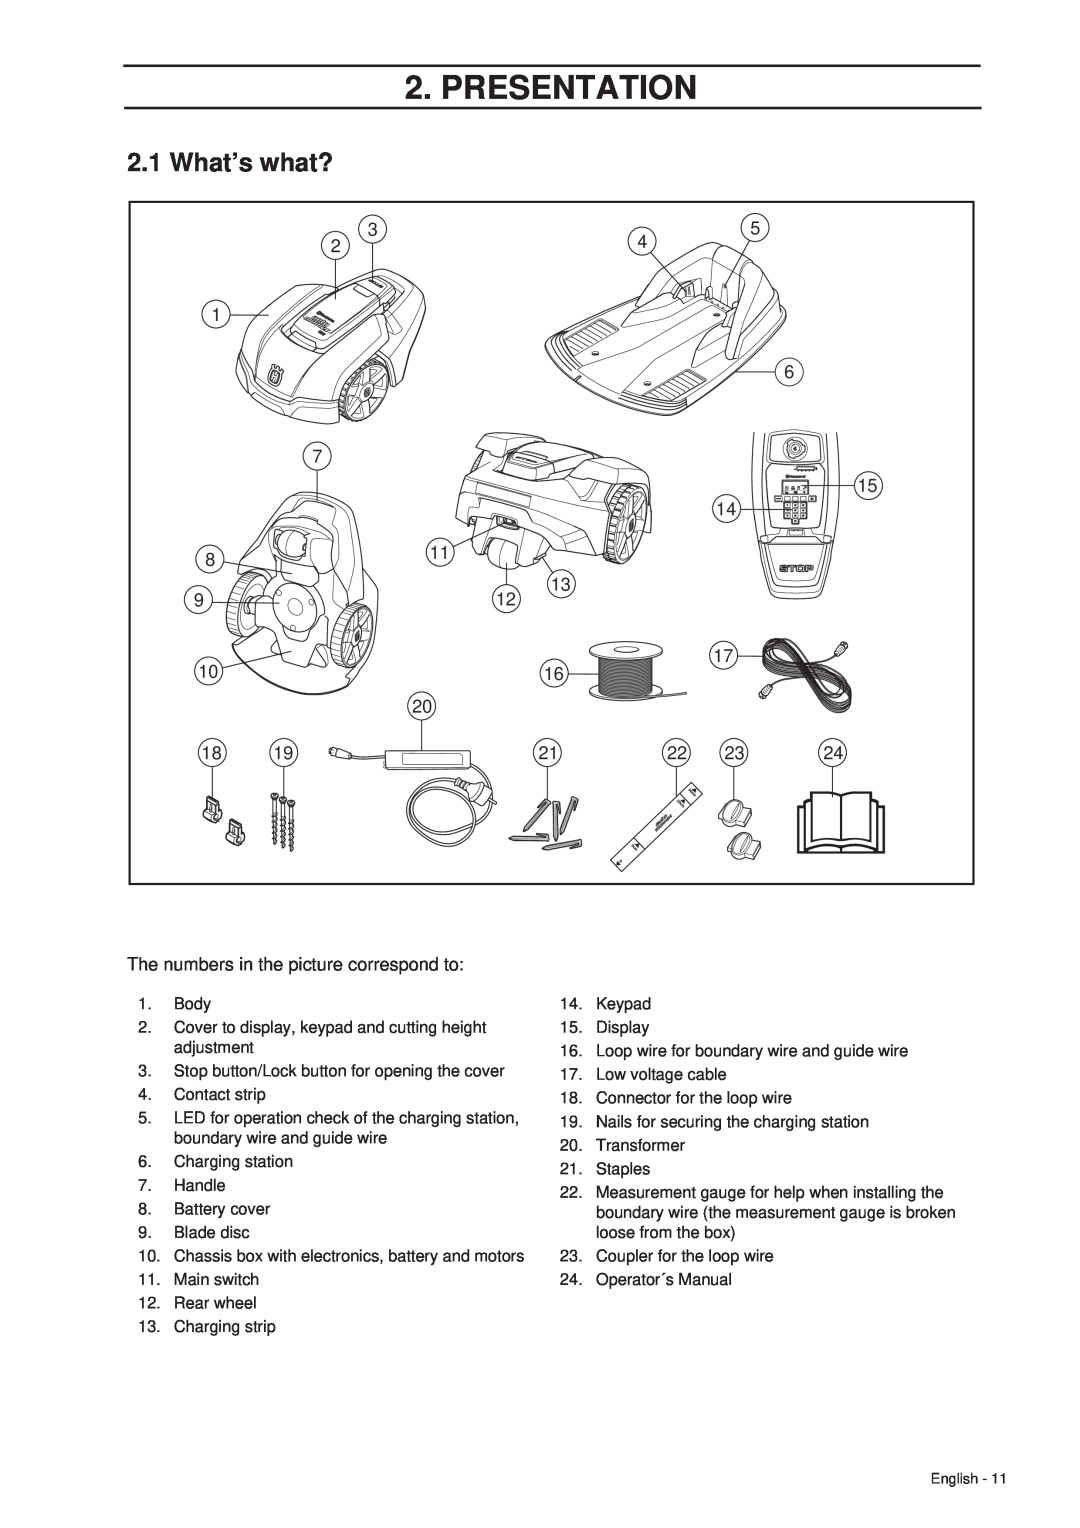 Husqvarna 305 manual Presentation, What’s what?, The numbers in the picture correspond to 